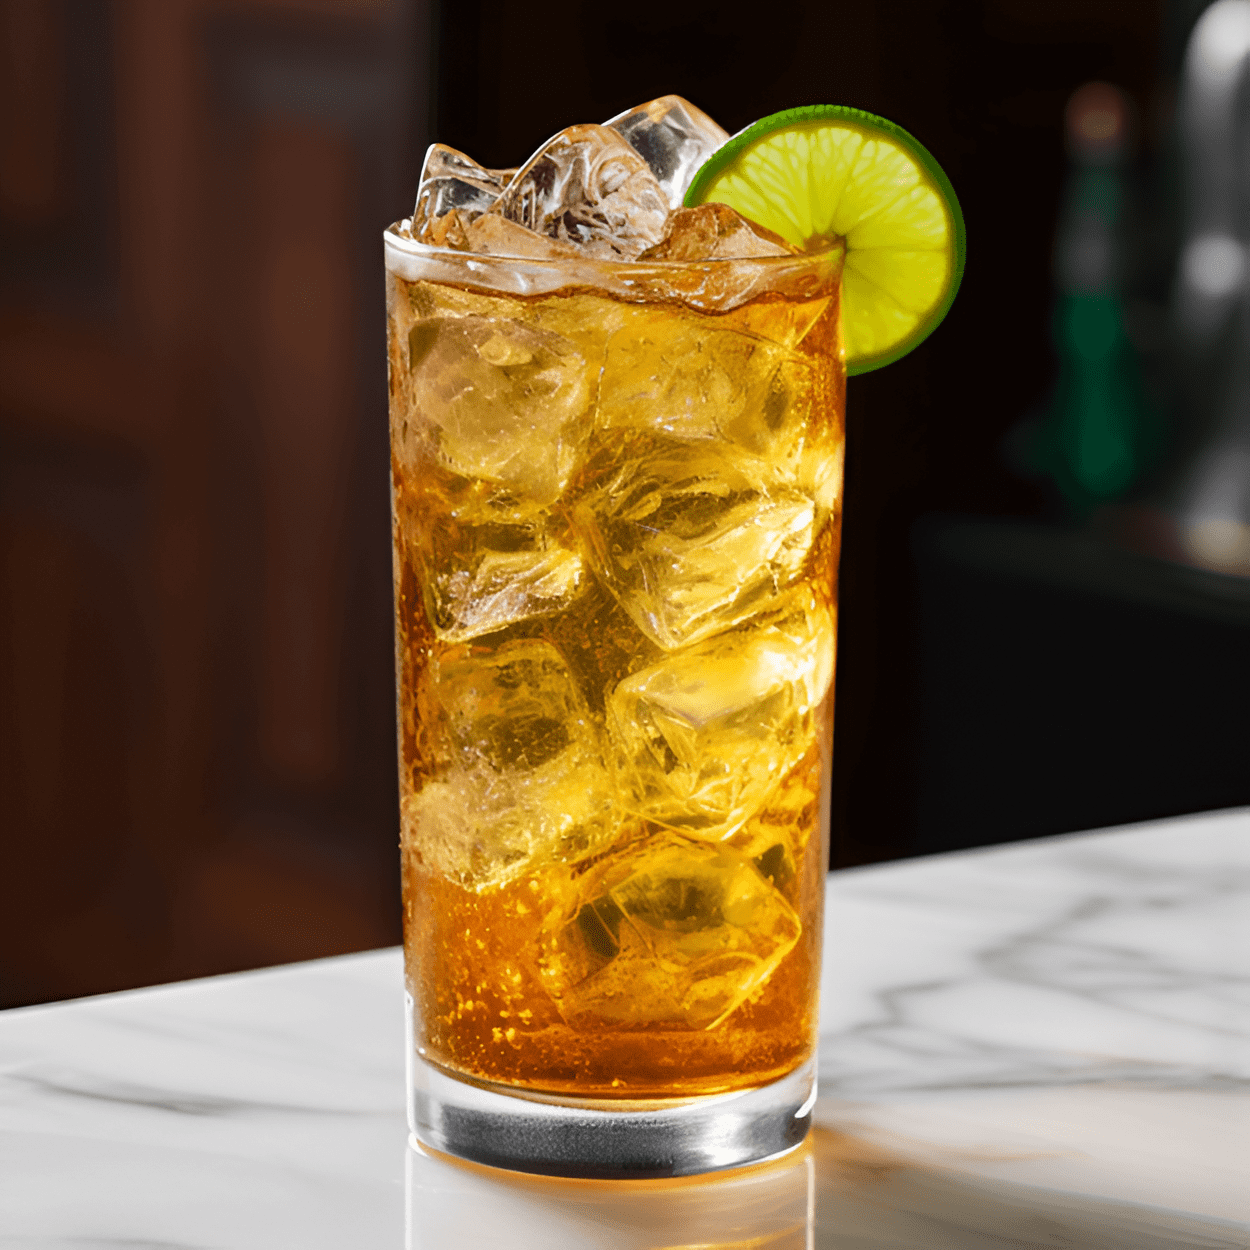 Parisian Mule Cocktail Recipe - The Parisian Mule has a rich, smooth, and slightly sweet taste. The cognac adds a depth of flavor that is both warming and comforting. The ginger beer gives it a refreshing kick, while the lime juice adds a touch of tartness.